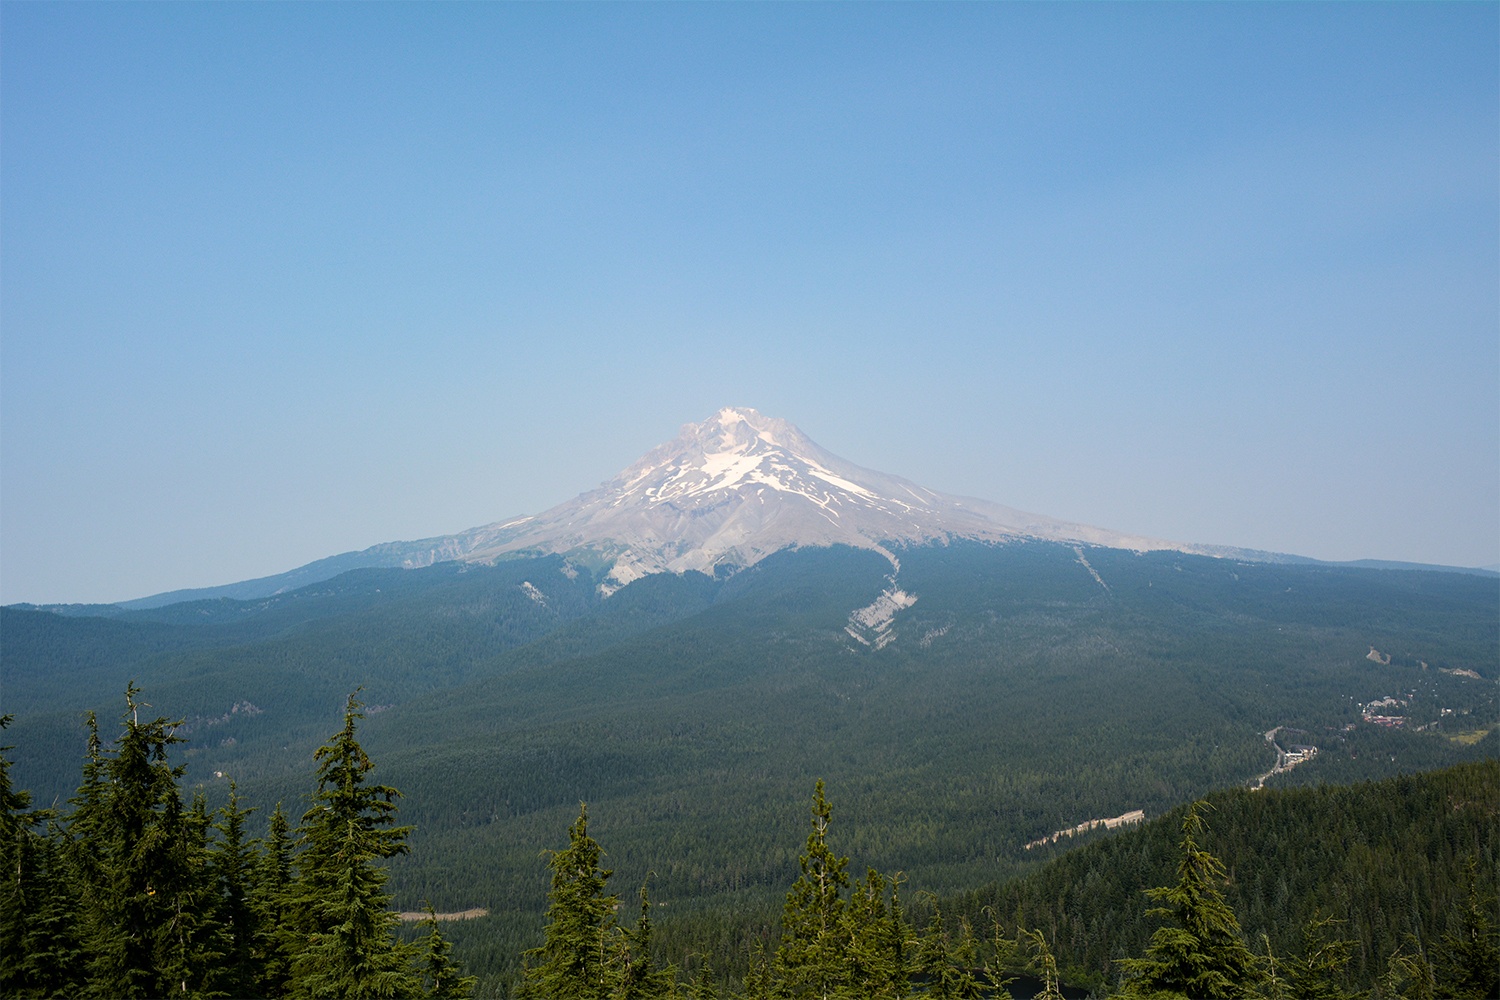 View of Mt Hood at the top of Tom Dick and Harry Mountain